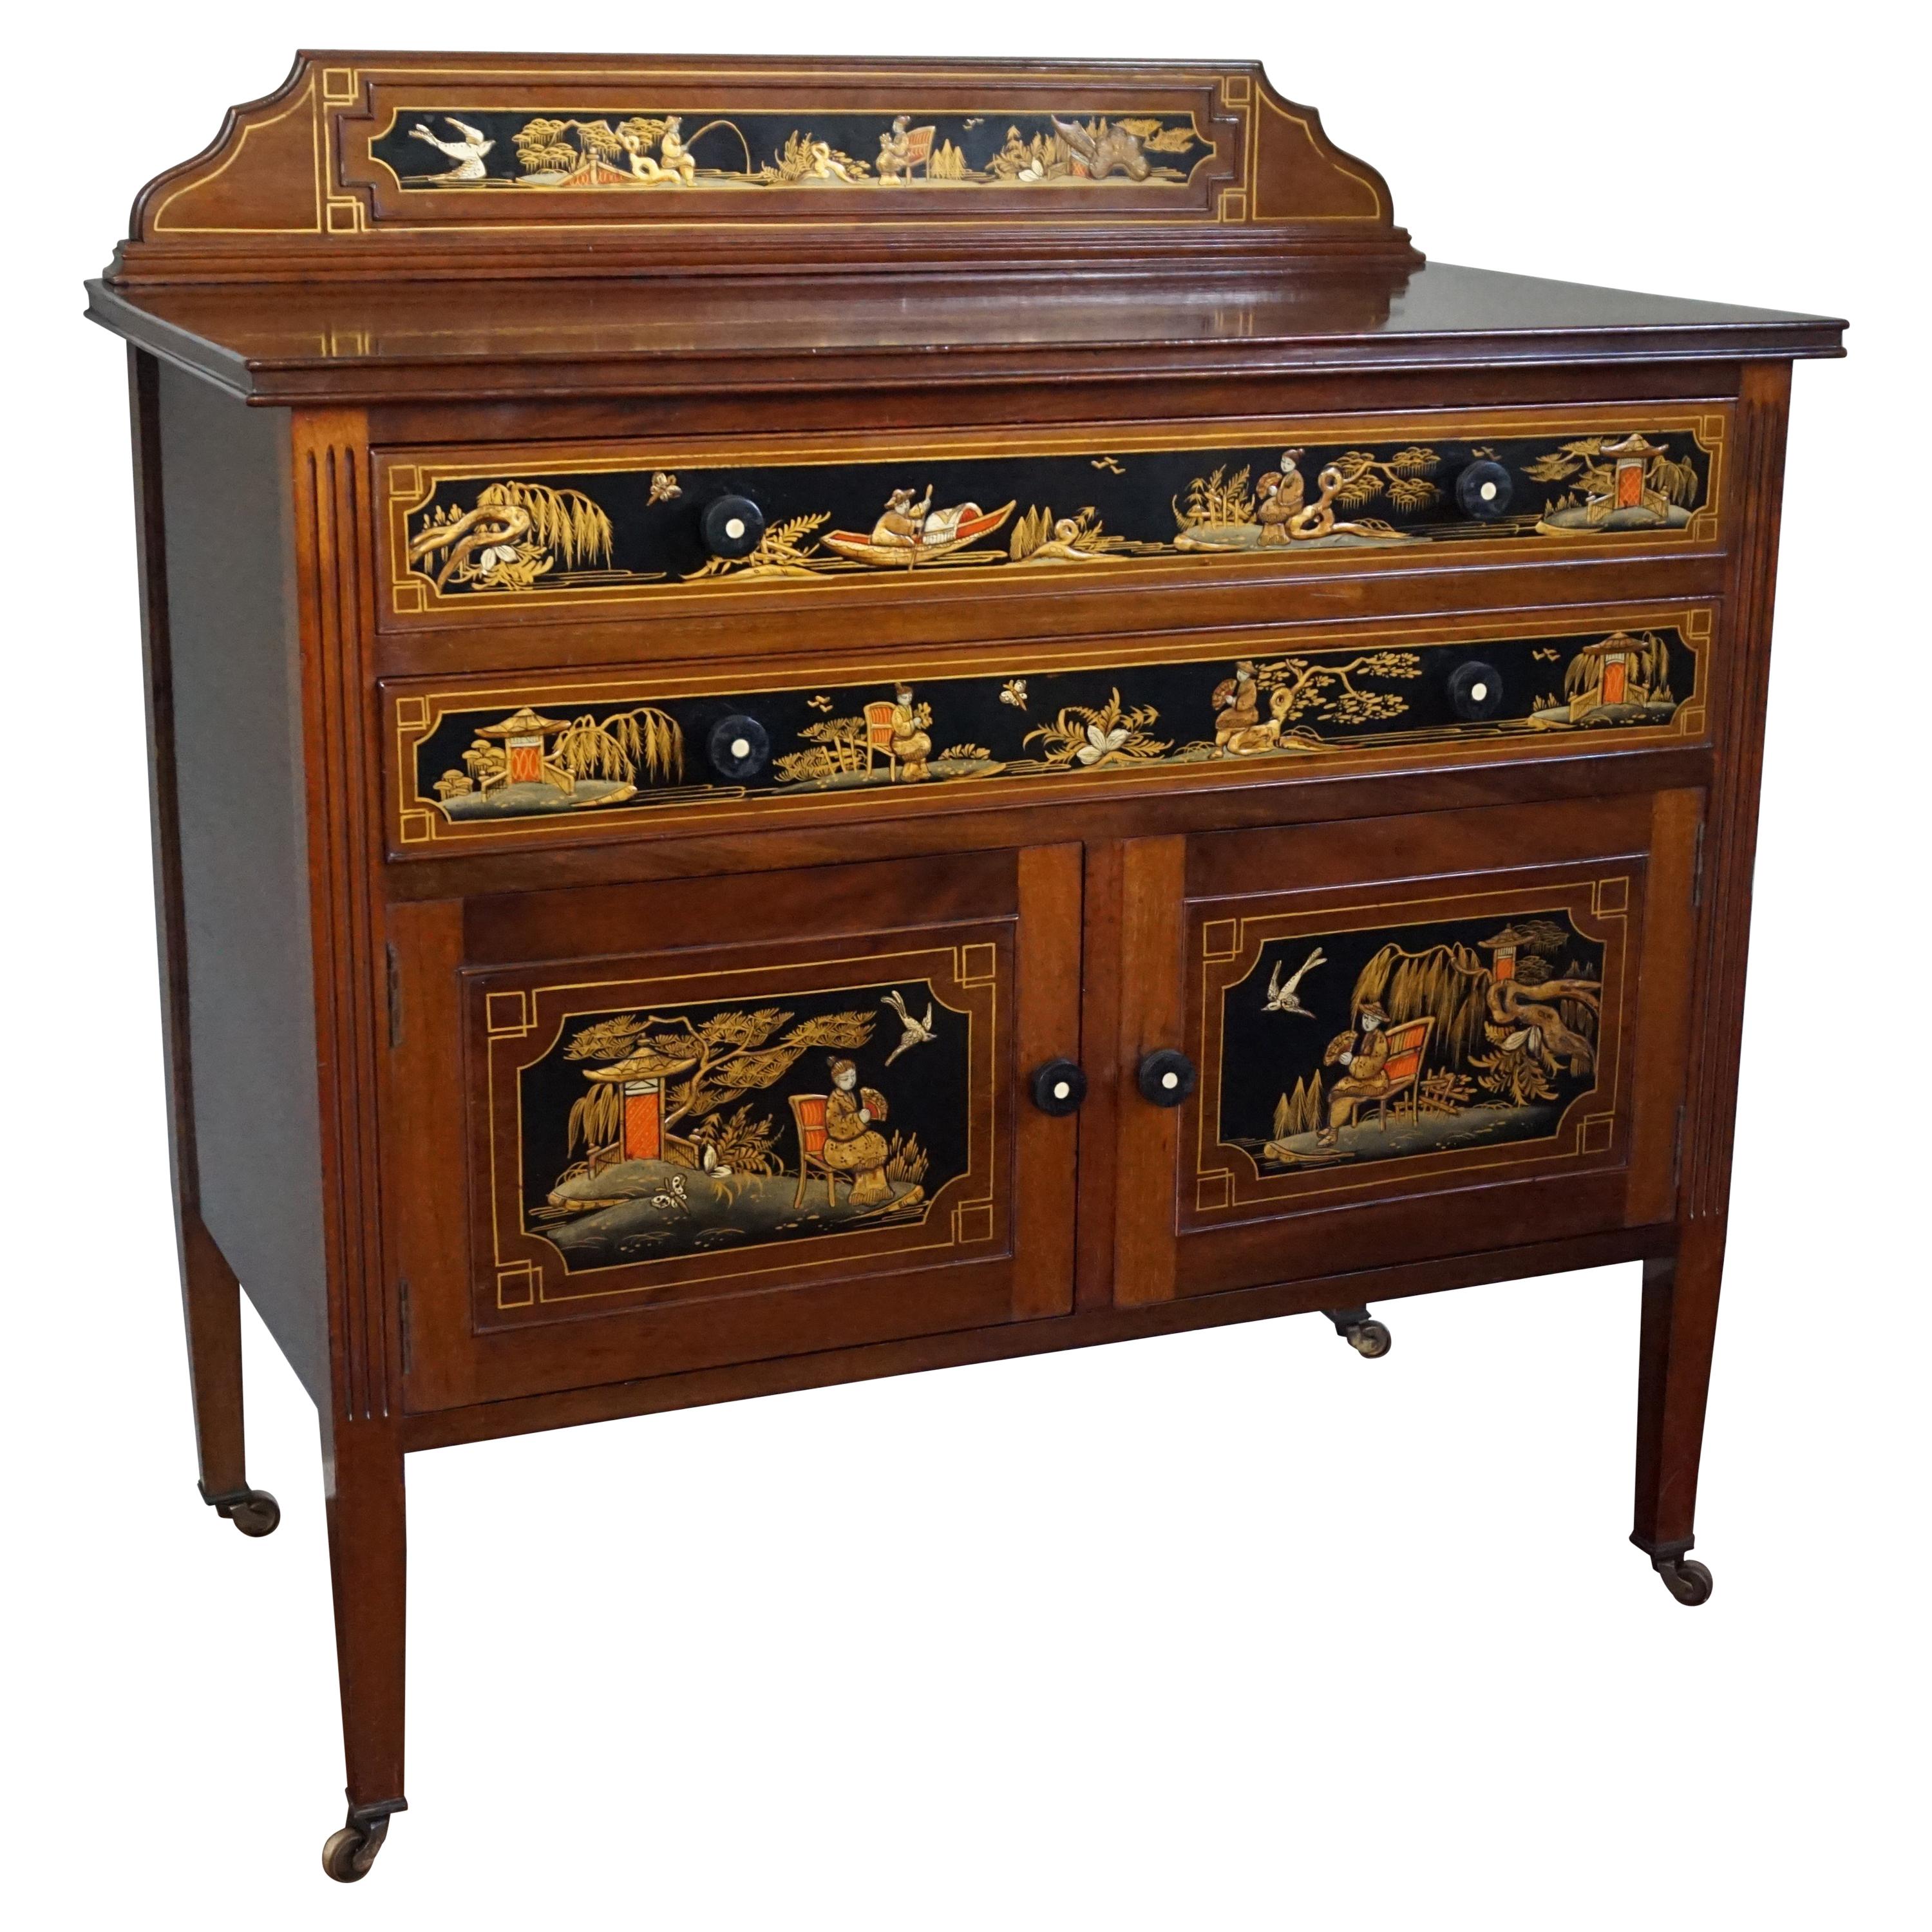 Antique & Hand-Painted, Mahogany Dresser / Commode in Stunning Chinoiserie Style